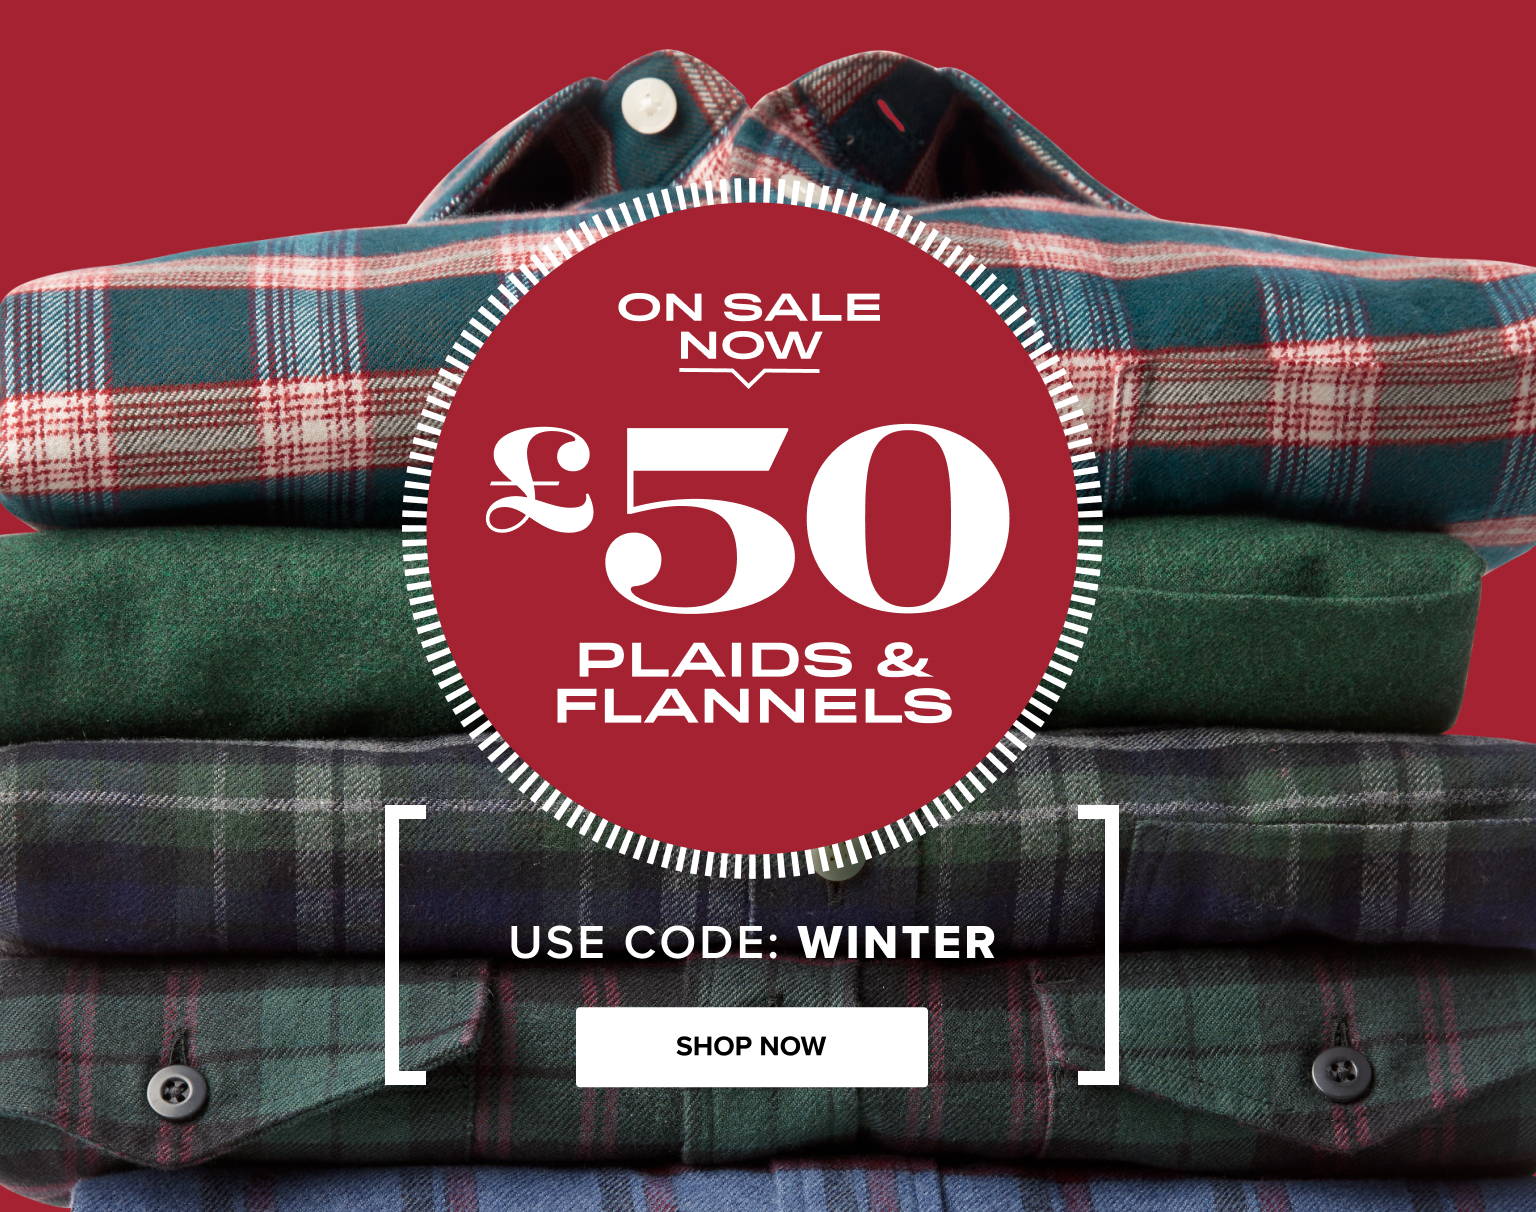 £50 Plaids & Flannels Use Code WINTER